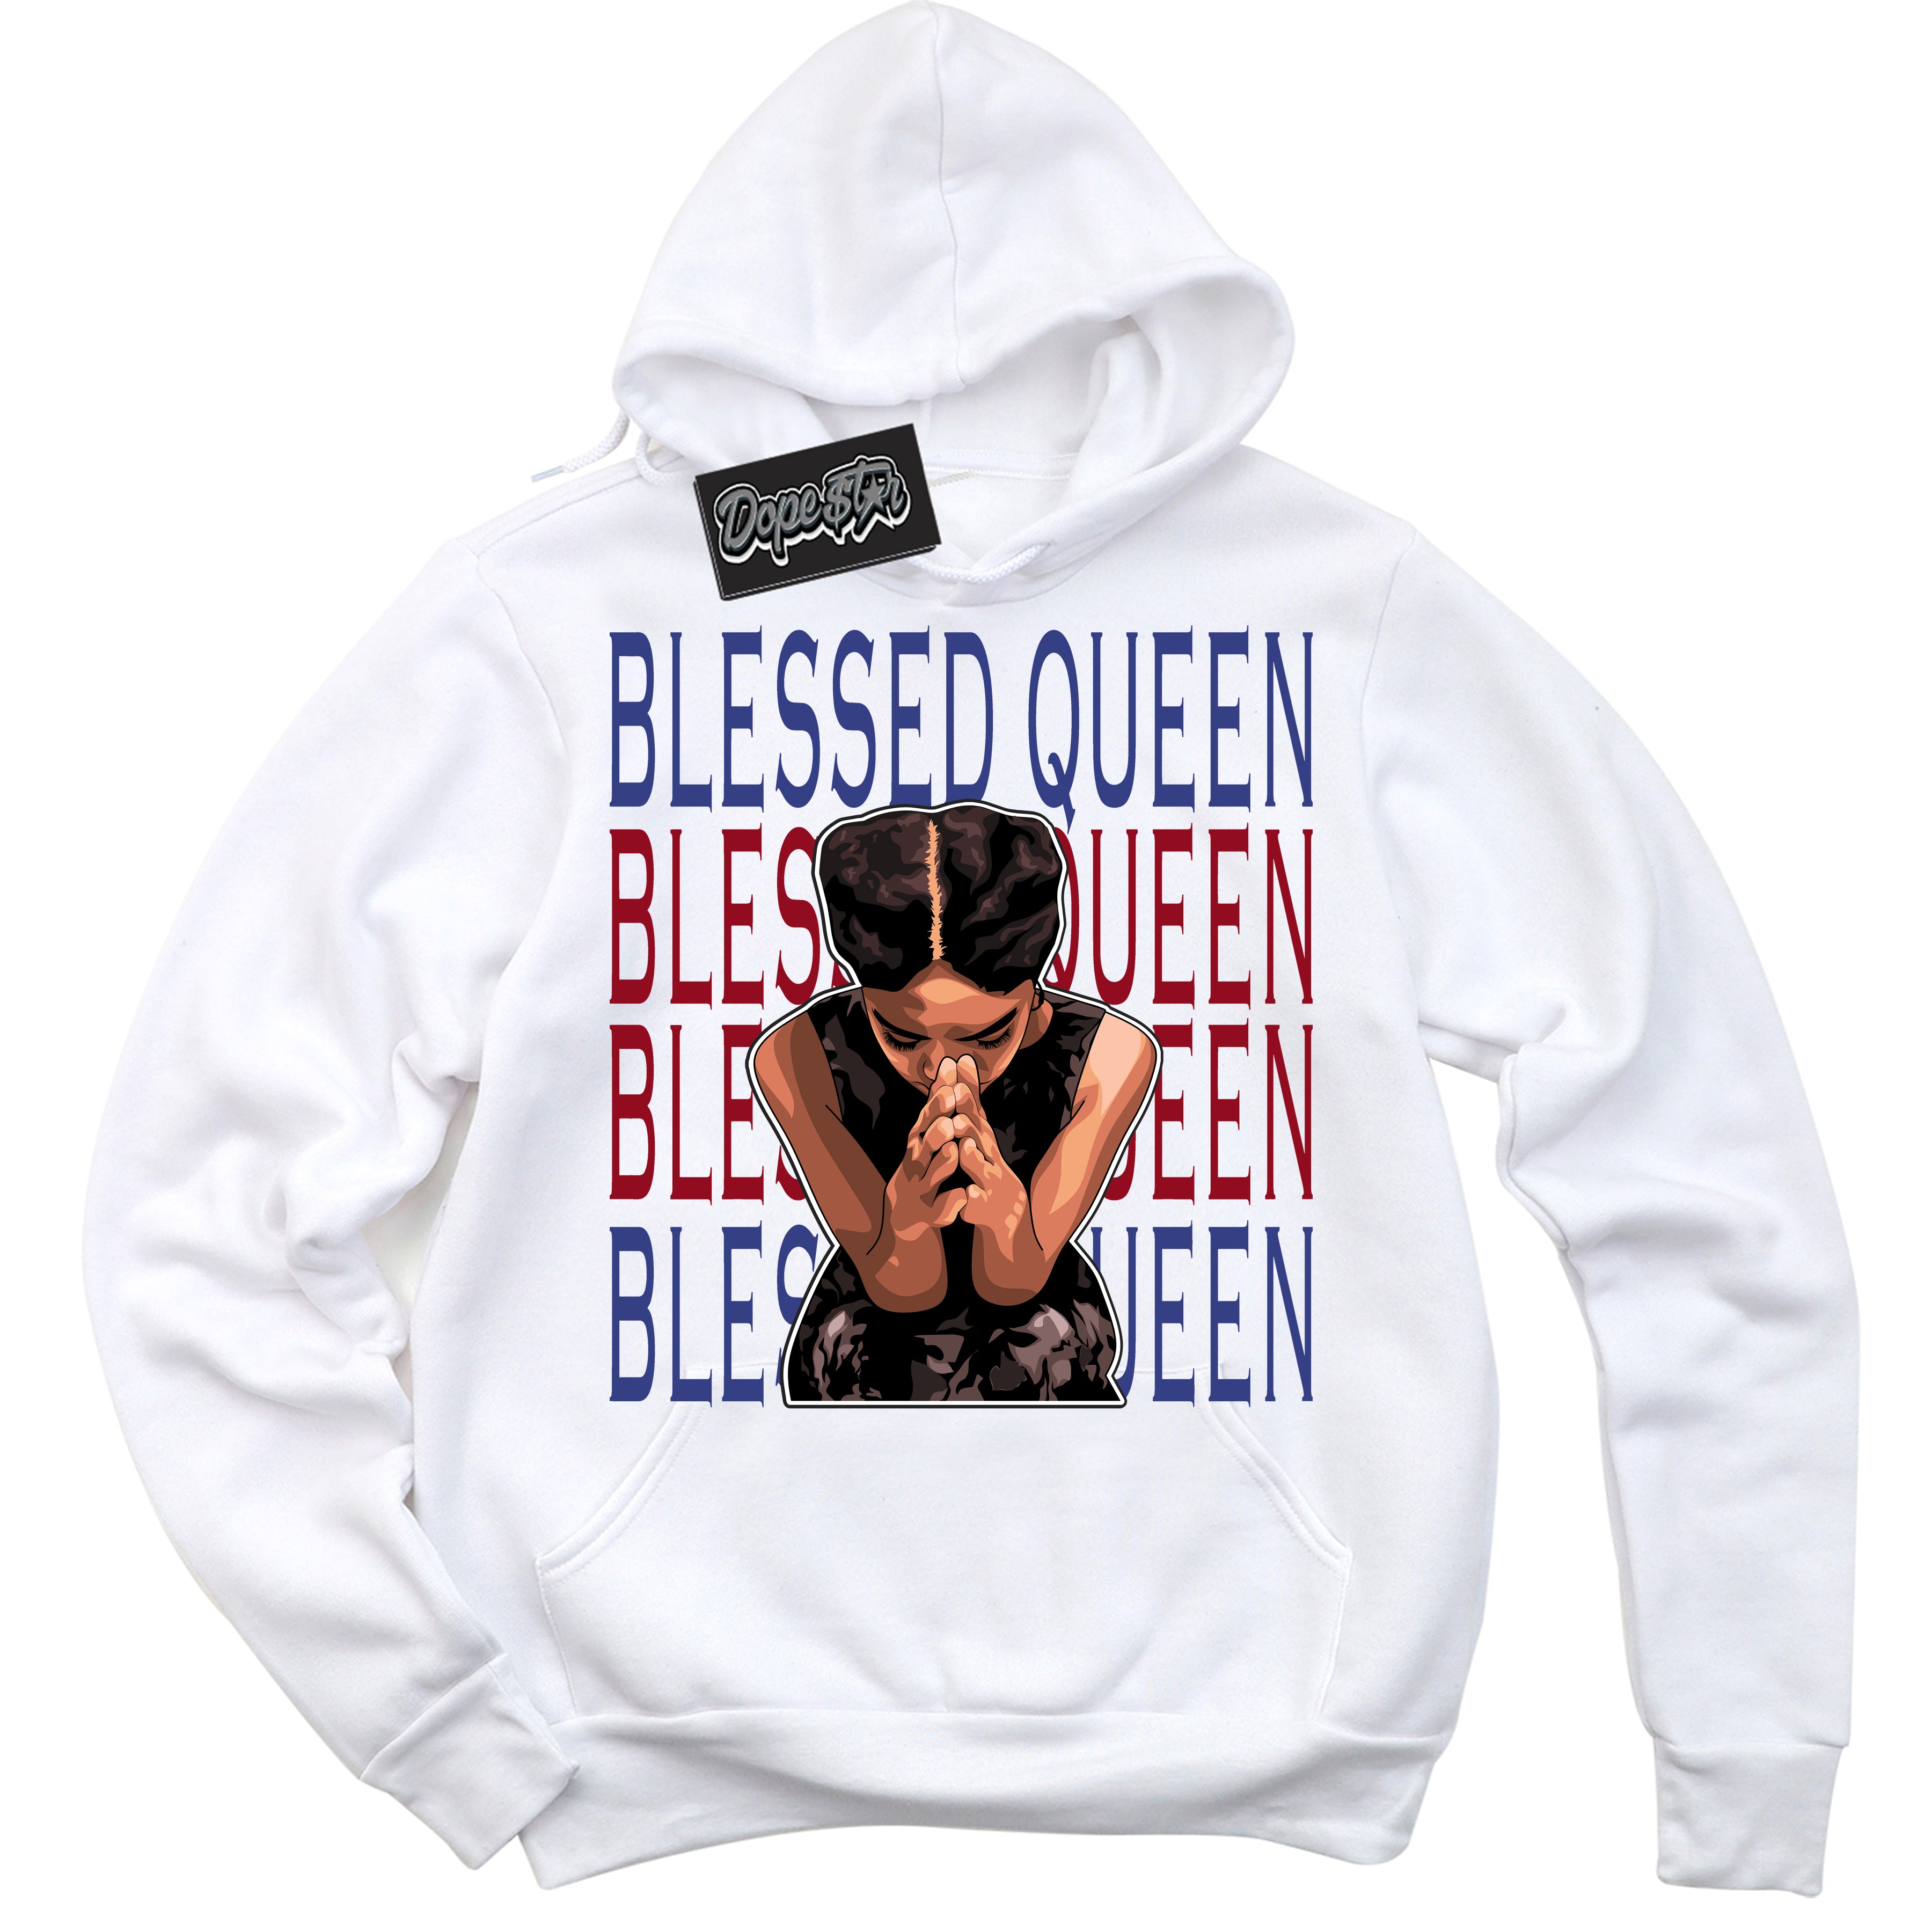 Cool White Hoodie with “ Blessed Queen ”  design that Perfectly Matches Playoffs 8s Sneakers.